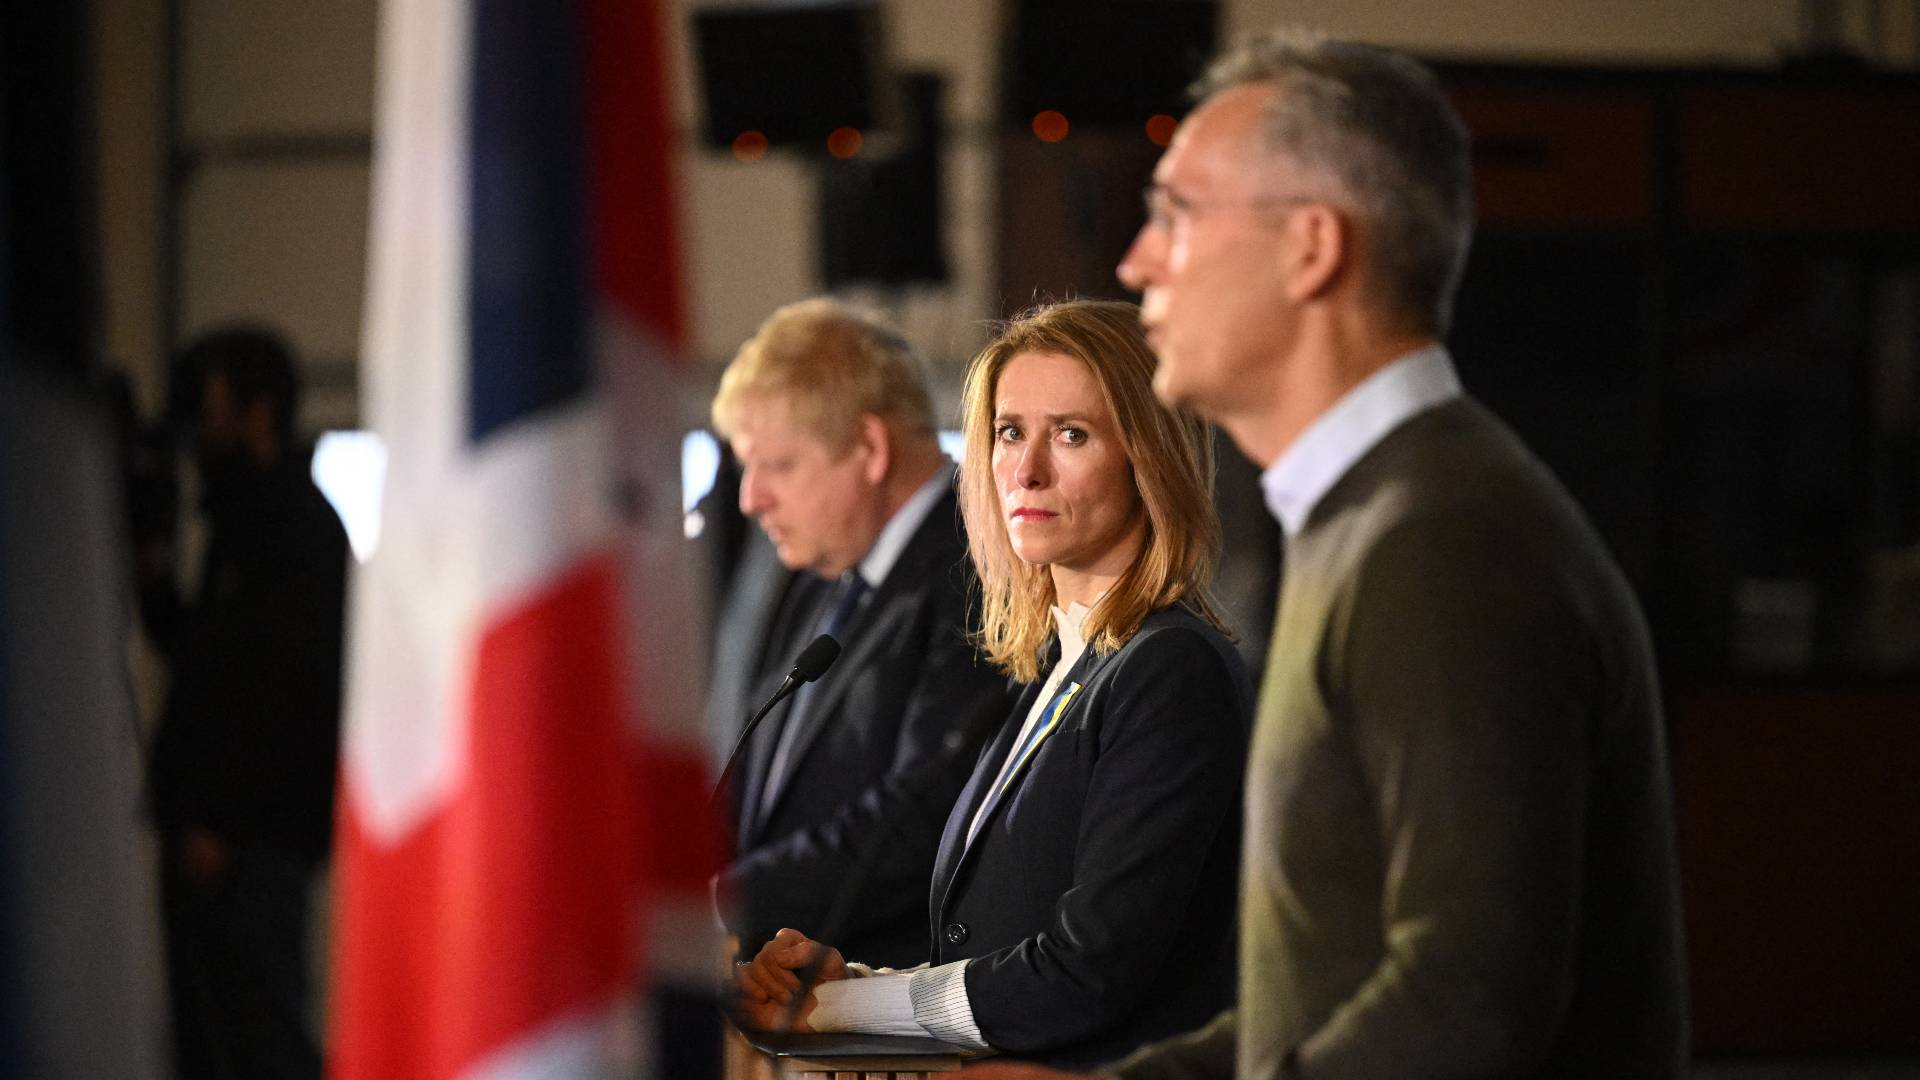 Secretary General of NATO, Jens Stoltenberg speaks during a joint press conference with the Prime Minister of Estonia Kaja Kallas (C) and British Prime Minister Boris Johnson (L) at the Tapa Army Base on March 1, 2022 in Tallinn, Estonia